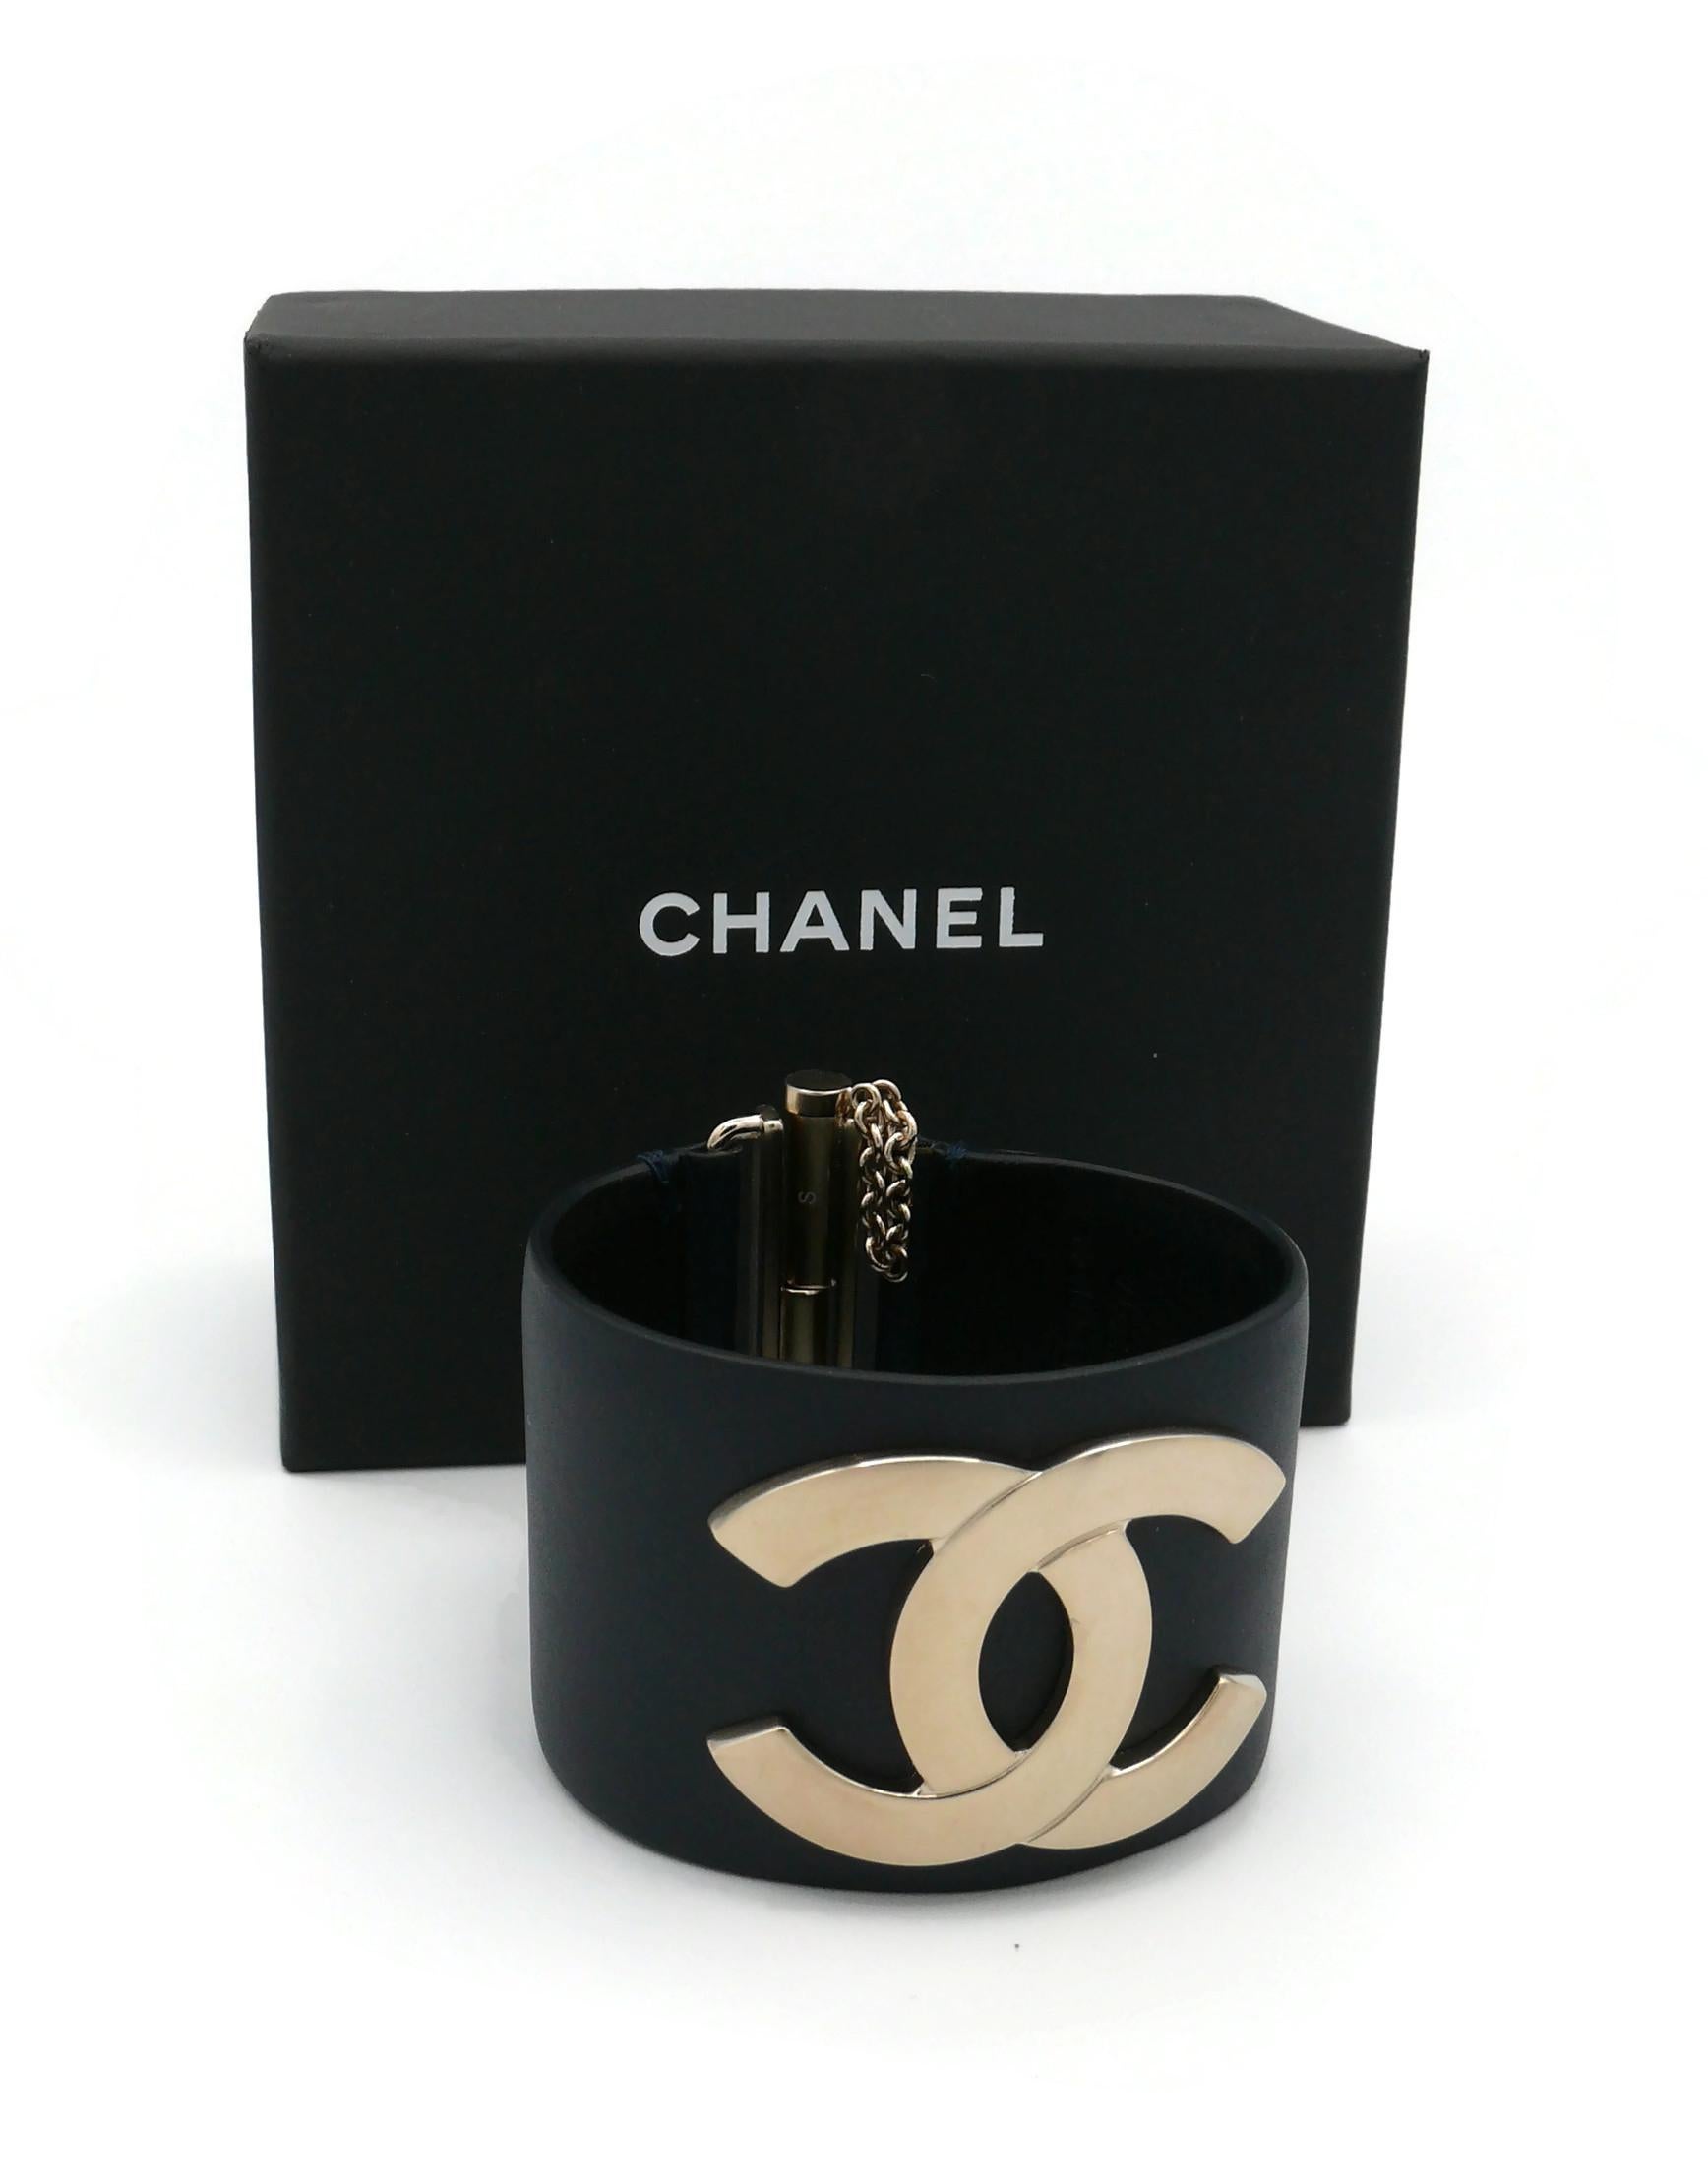 Chanel CC Logo Exclusive Edition 2017 Wide Dark Navy Blue Leather Cuff Bracelet In Excellent Condition For Sale In Nice, FR